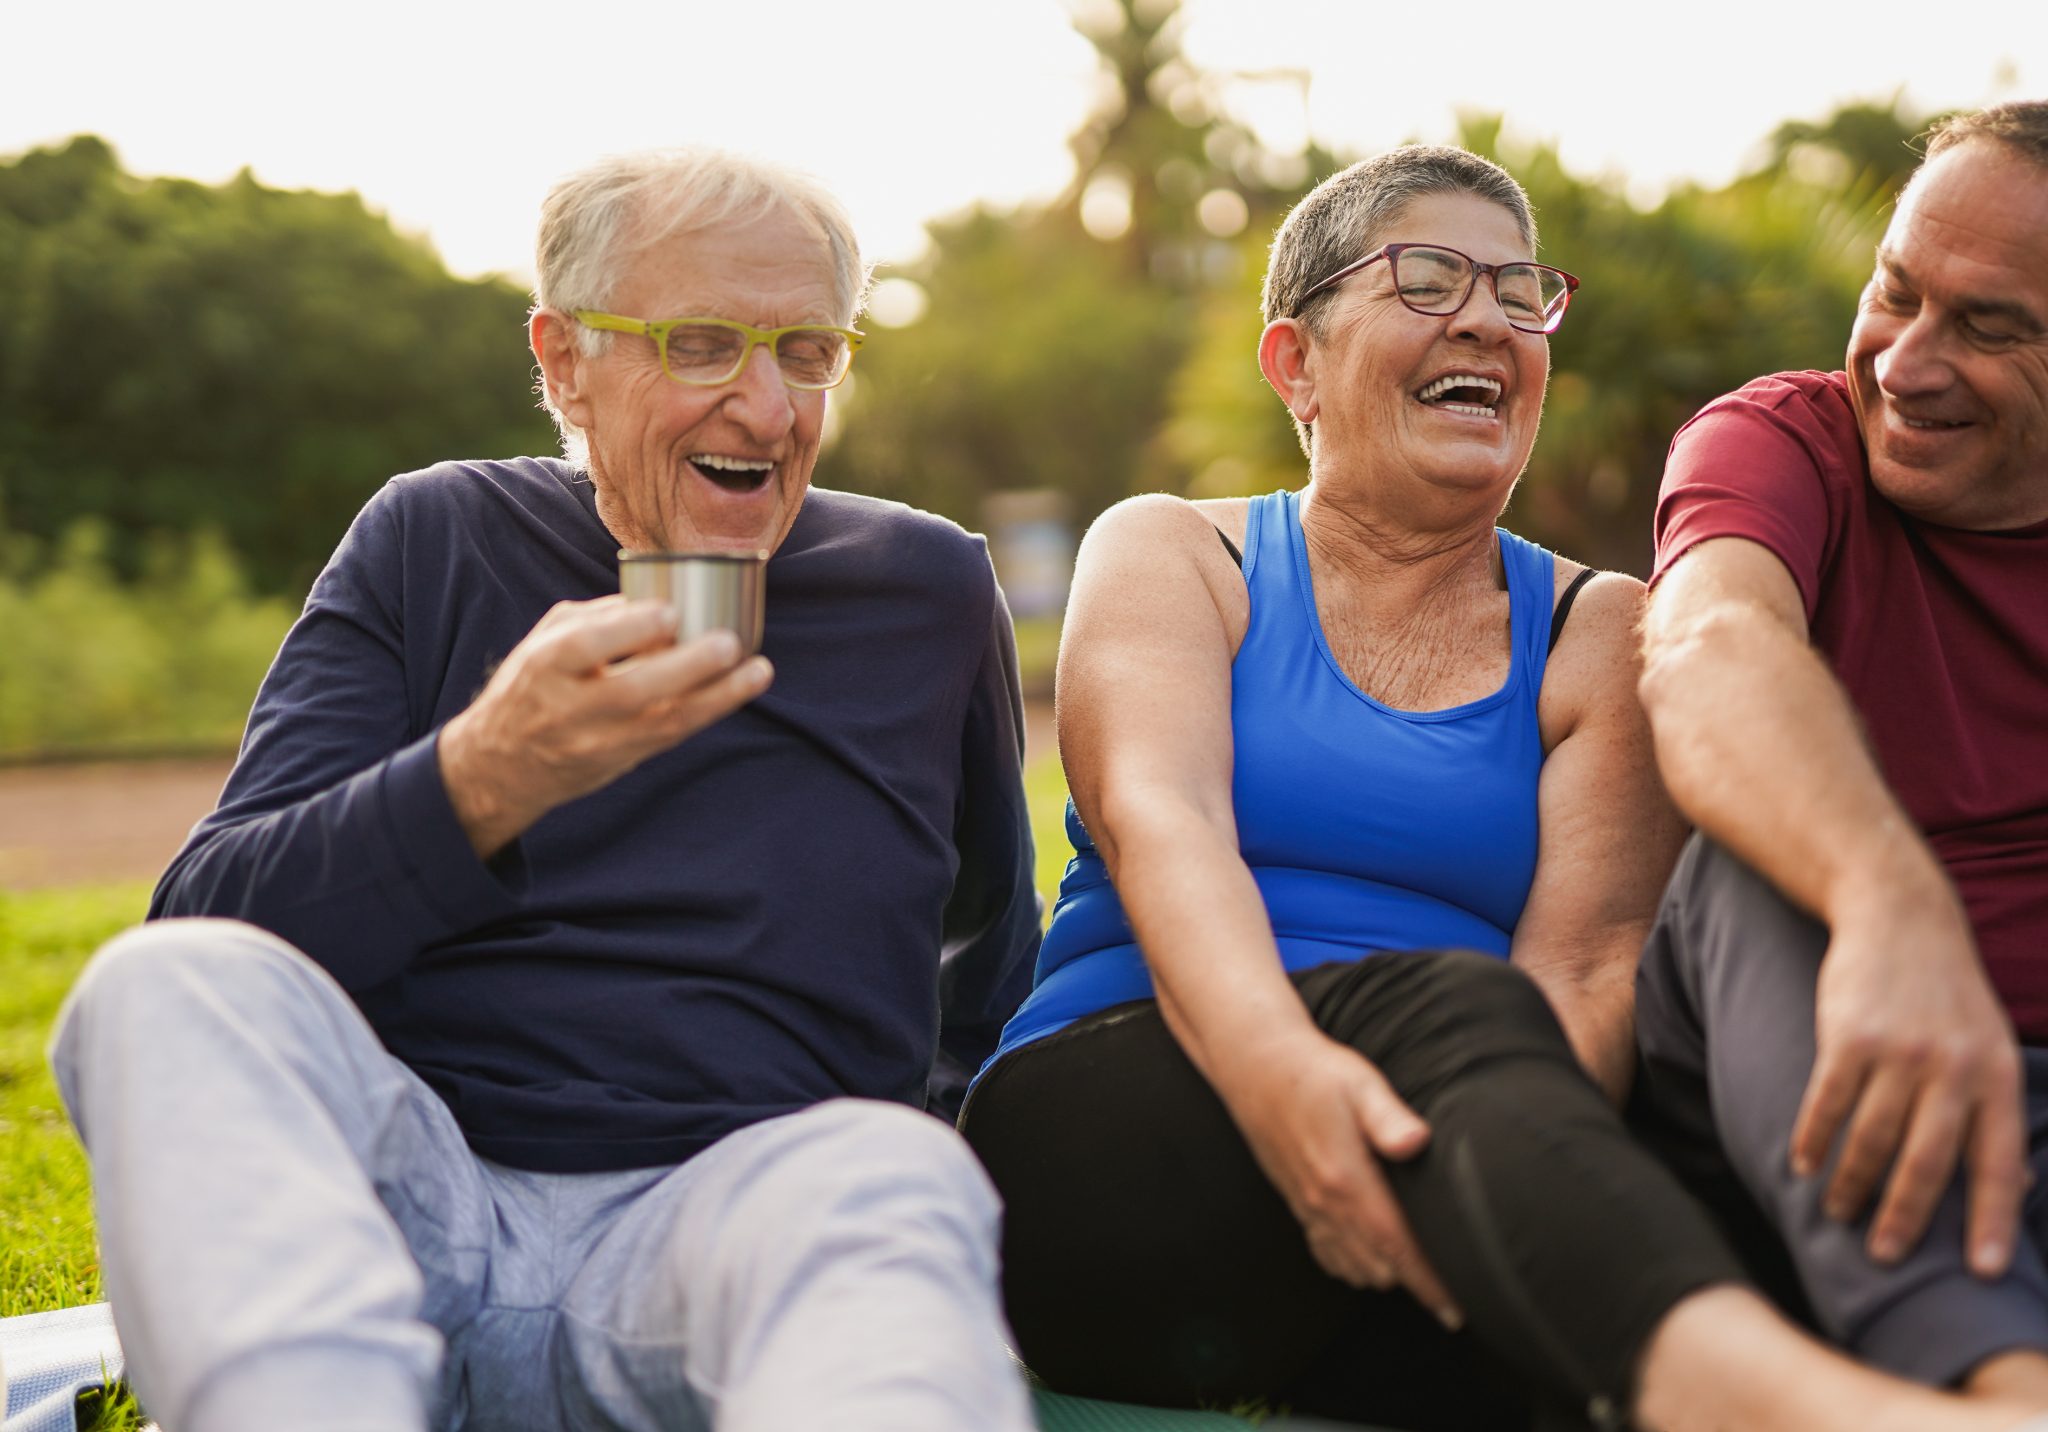 elderly health and wellness - group of seniors laughing together